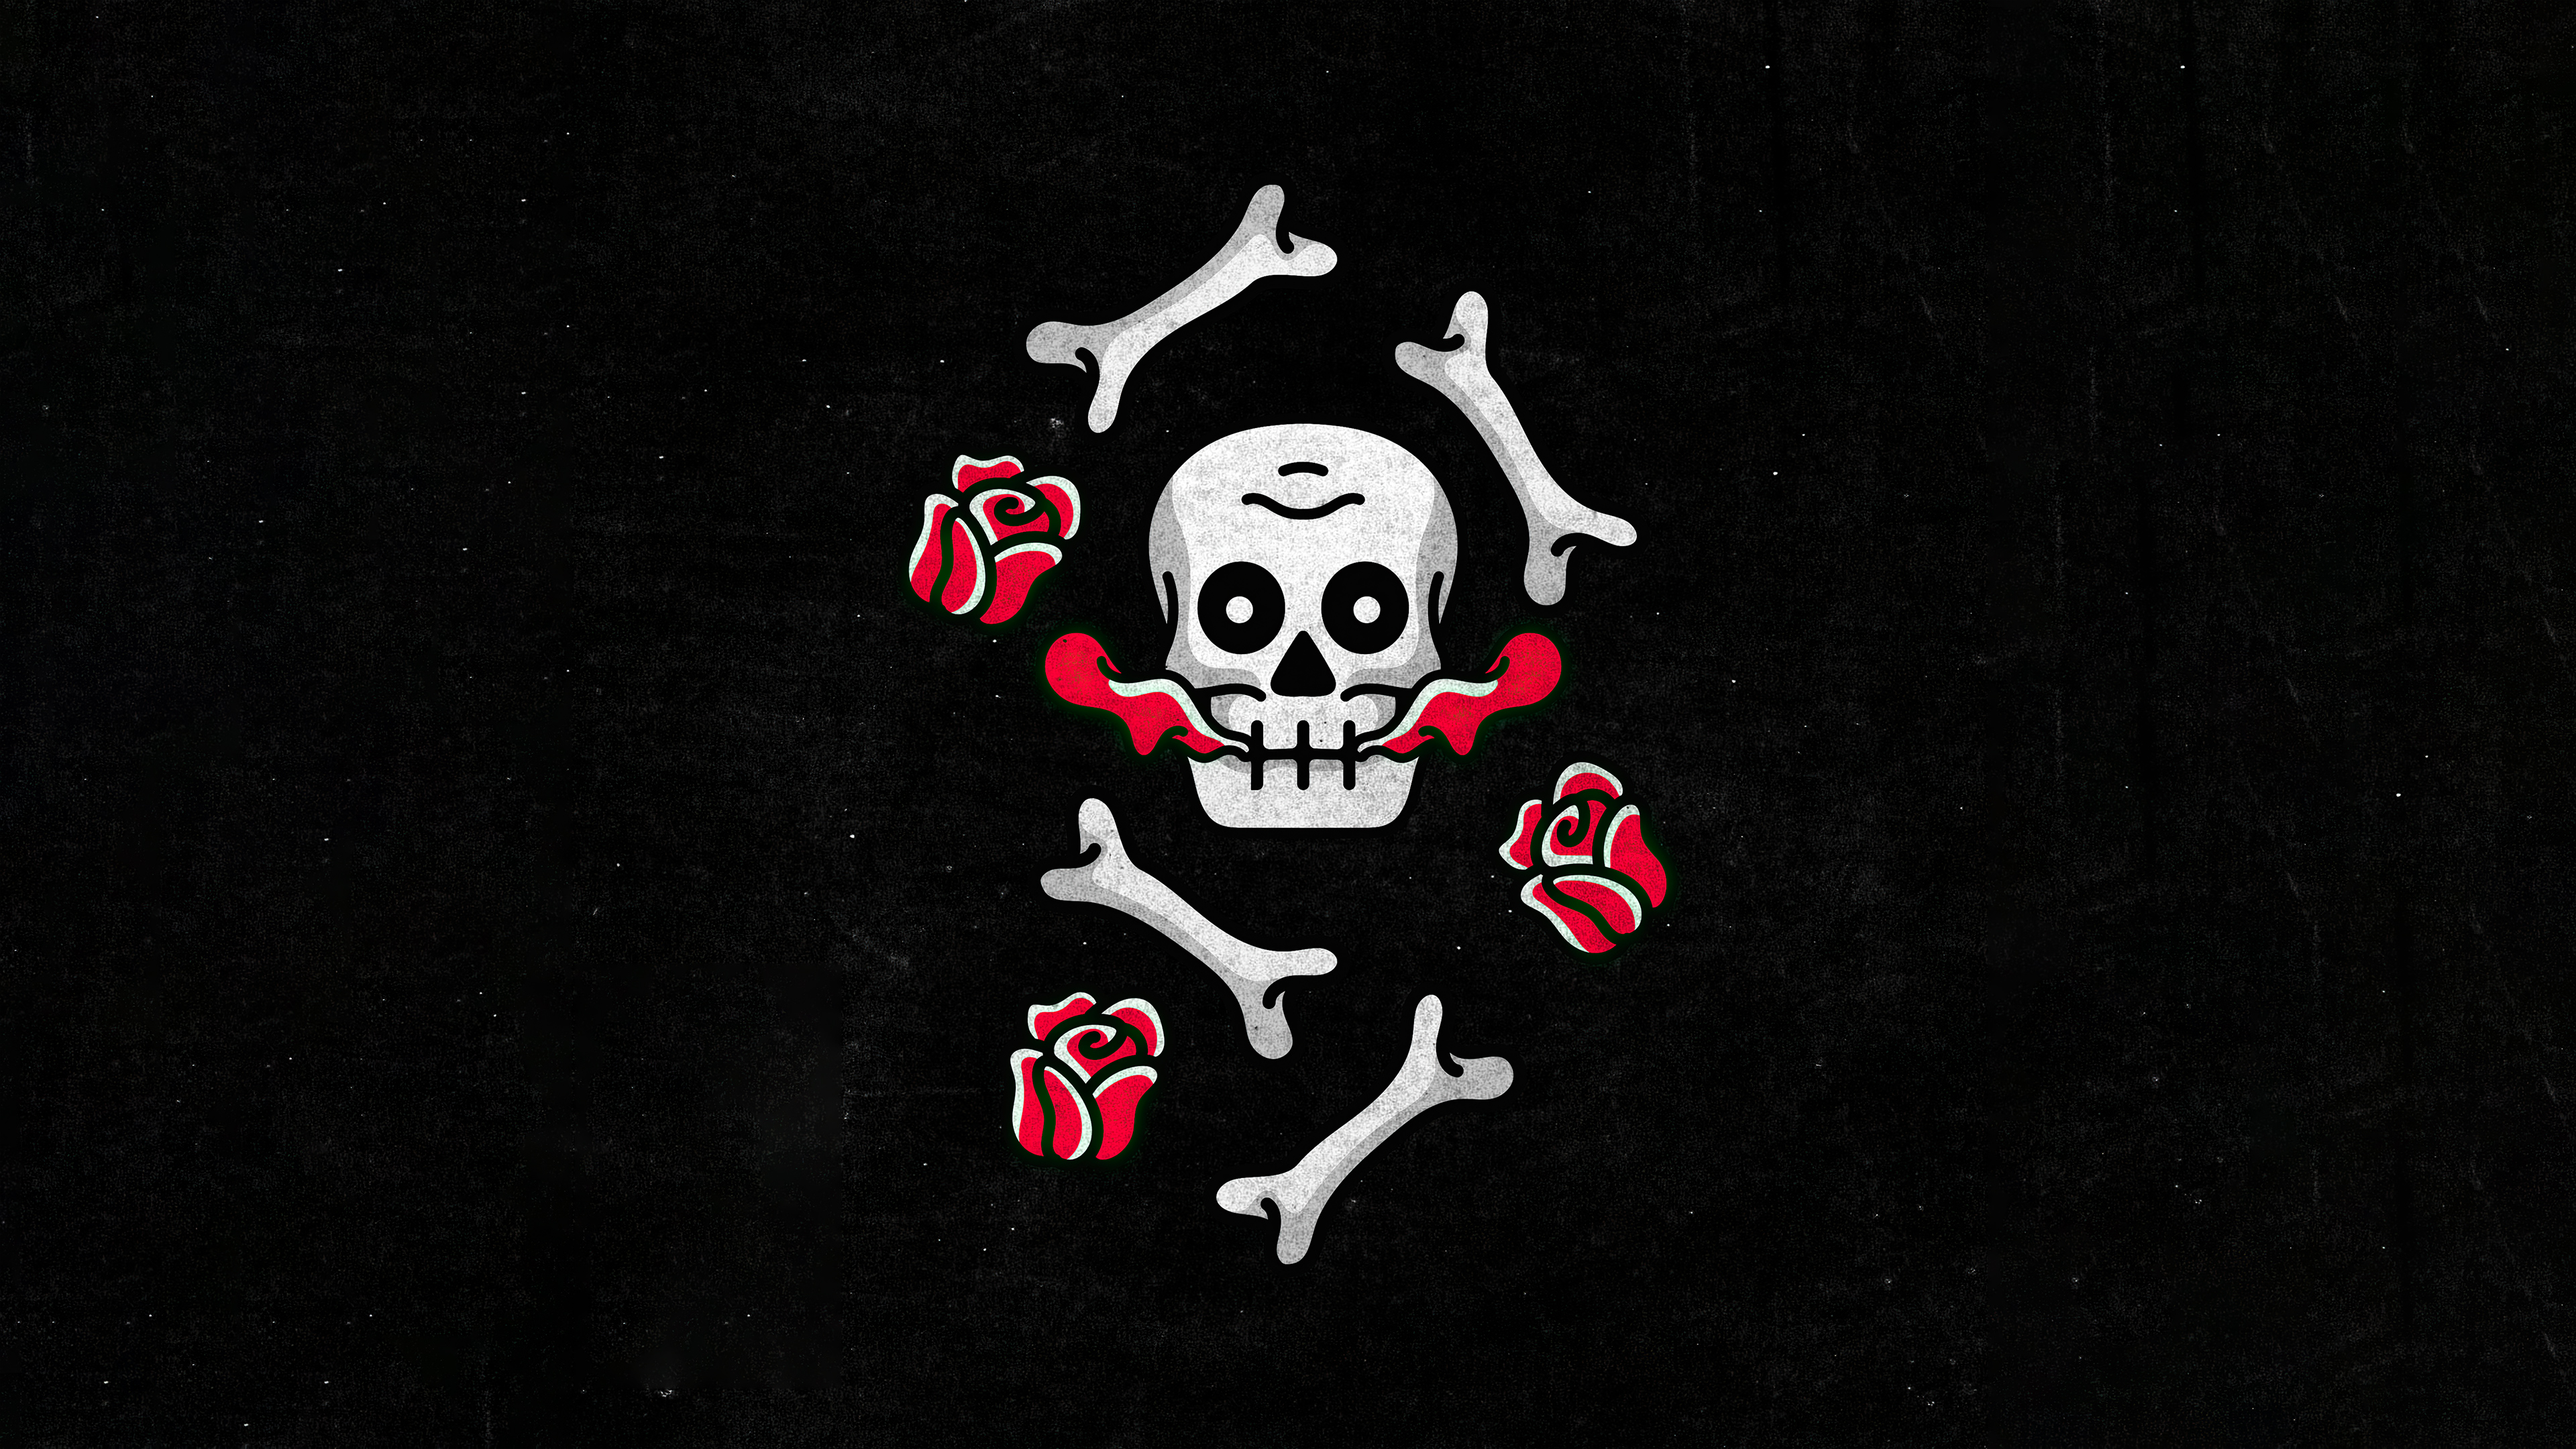 ROSE AND SKULL wallpaper by hende09  Download on ZEDGE  05a3